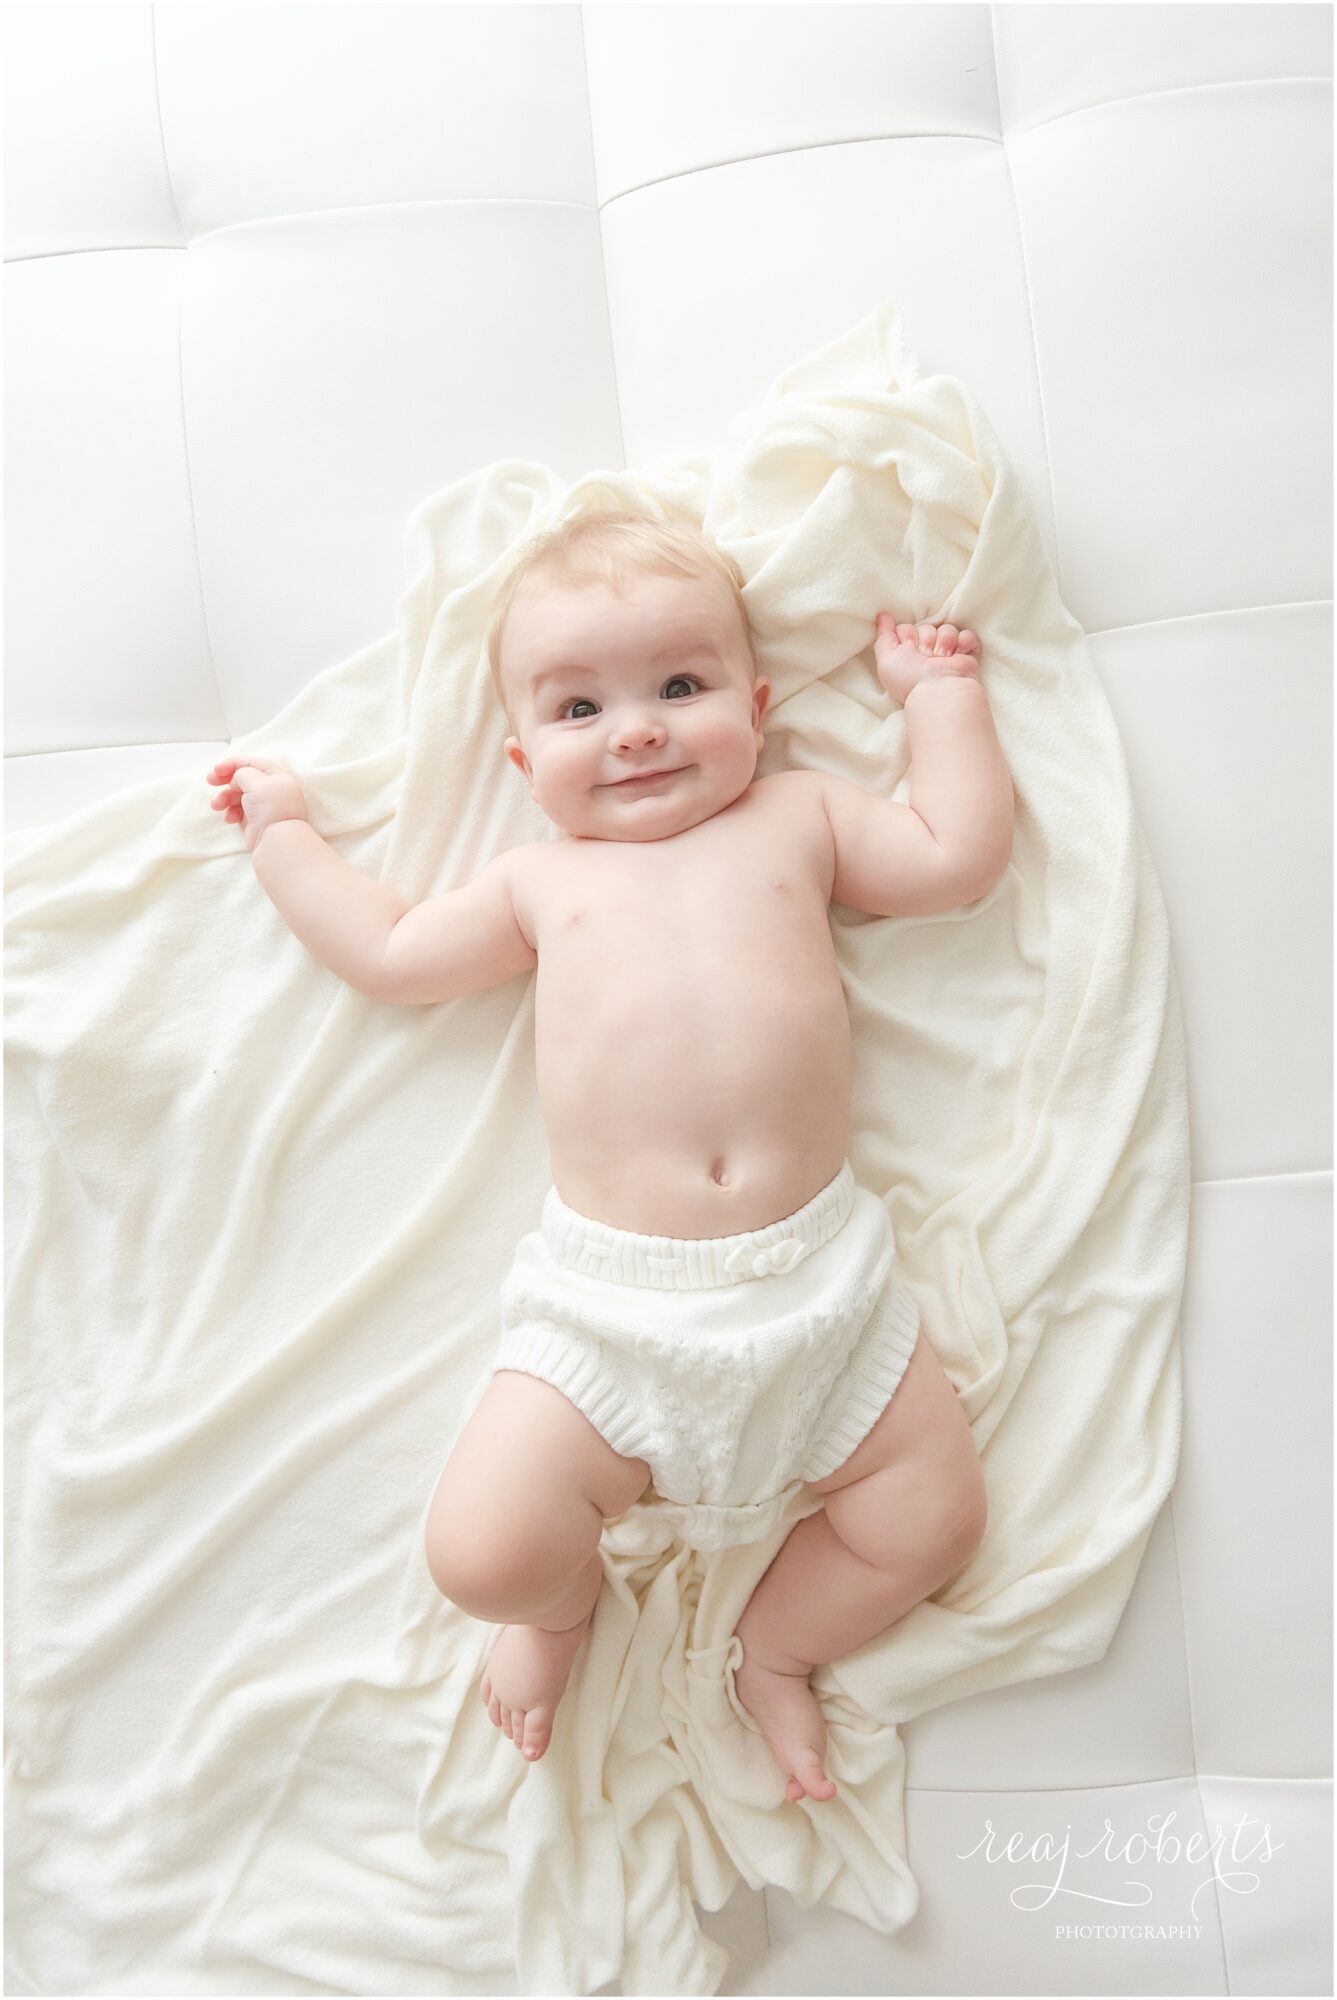 6 month baby session simple clean baby boy smiling in white